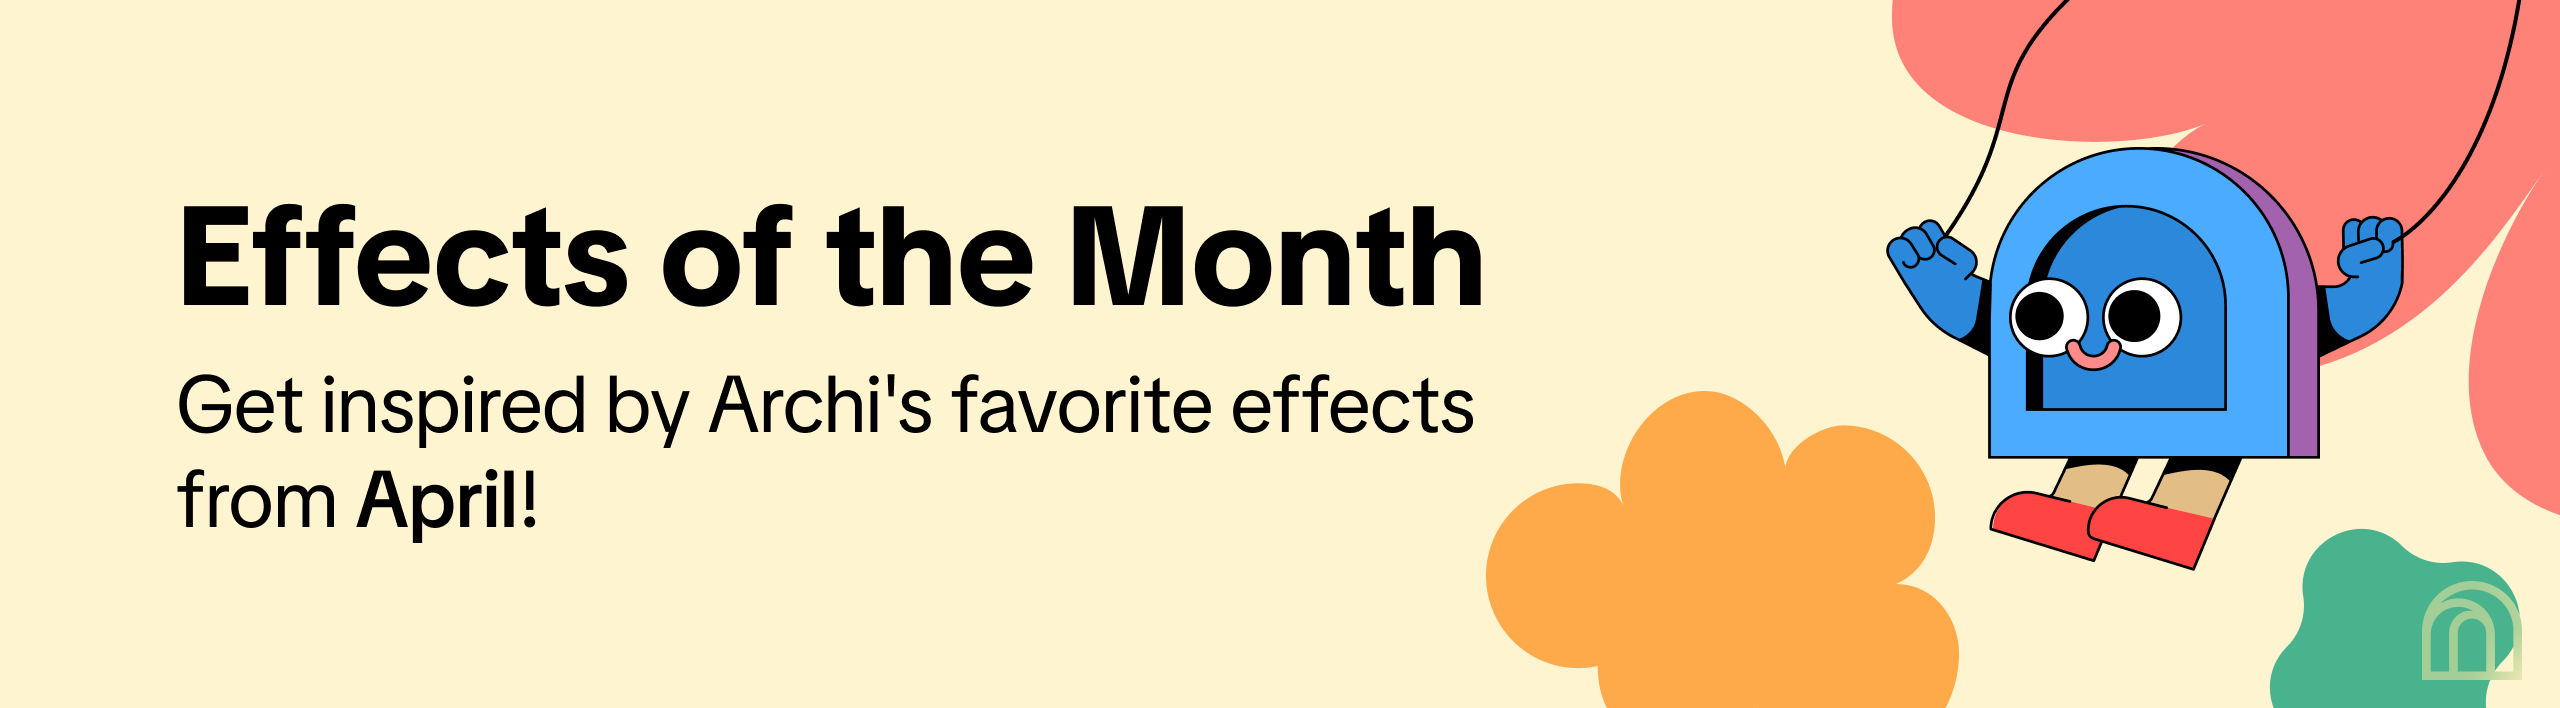 effects-of-the-month